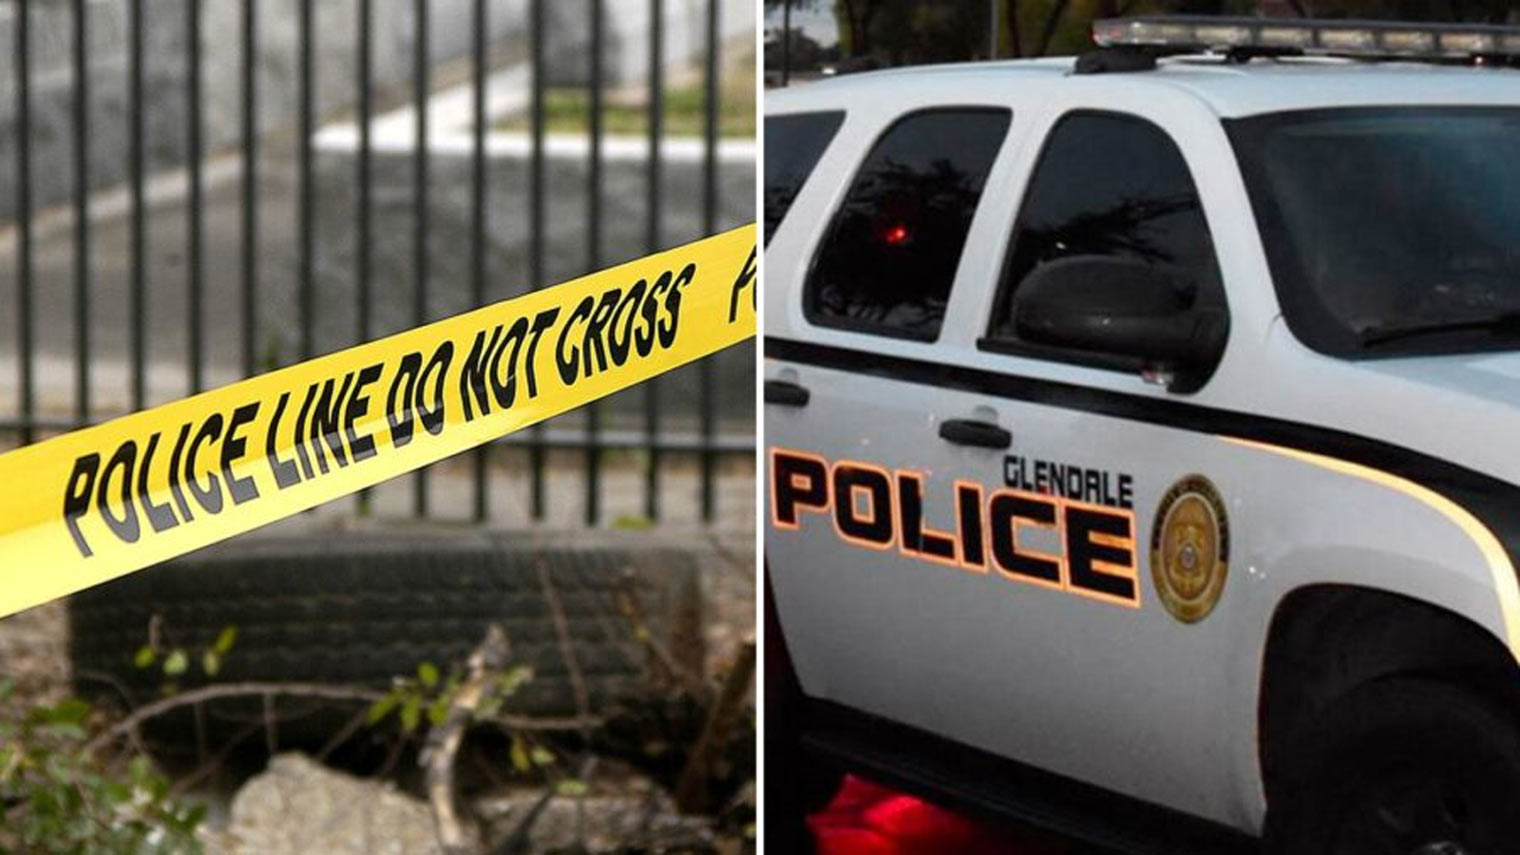 Split image of file photos shows yellow tape at a crime scene on the left and a Glendale police veh...